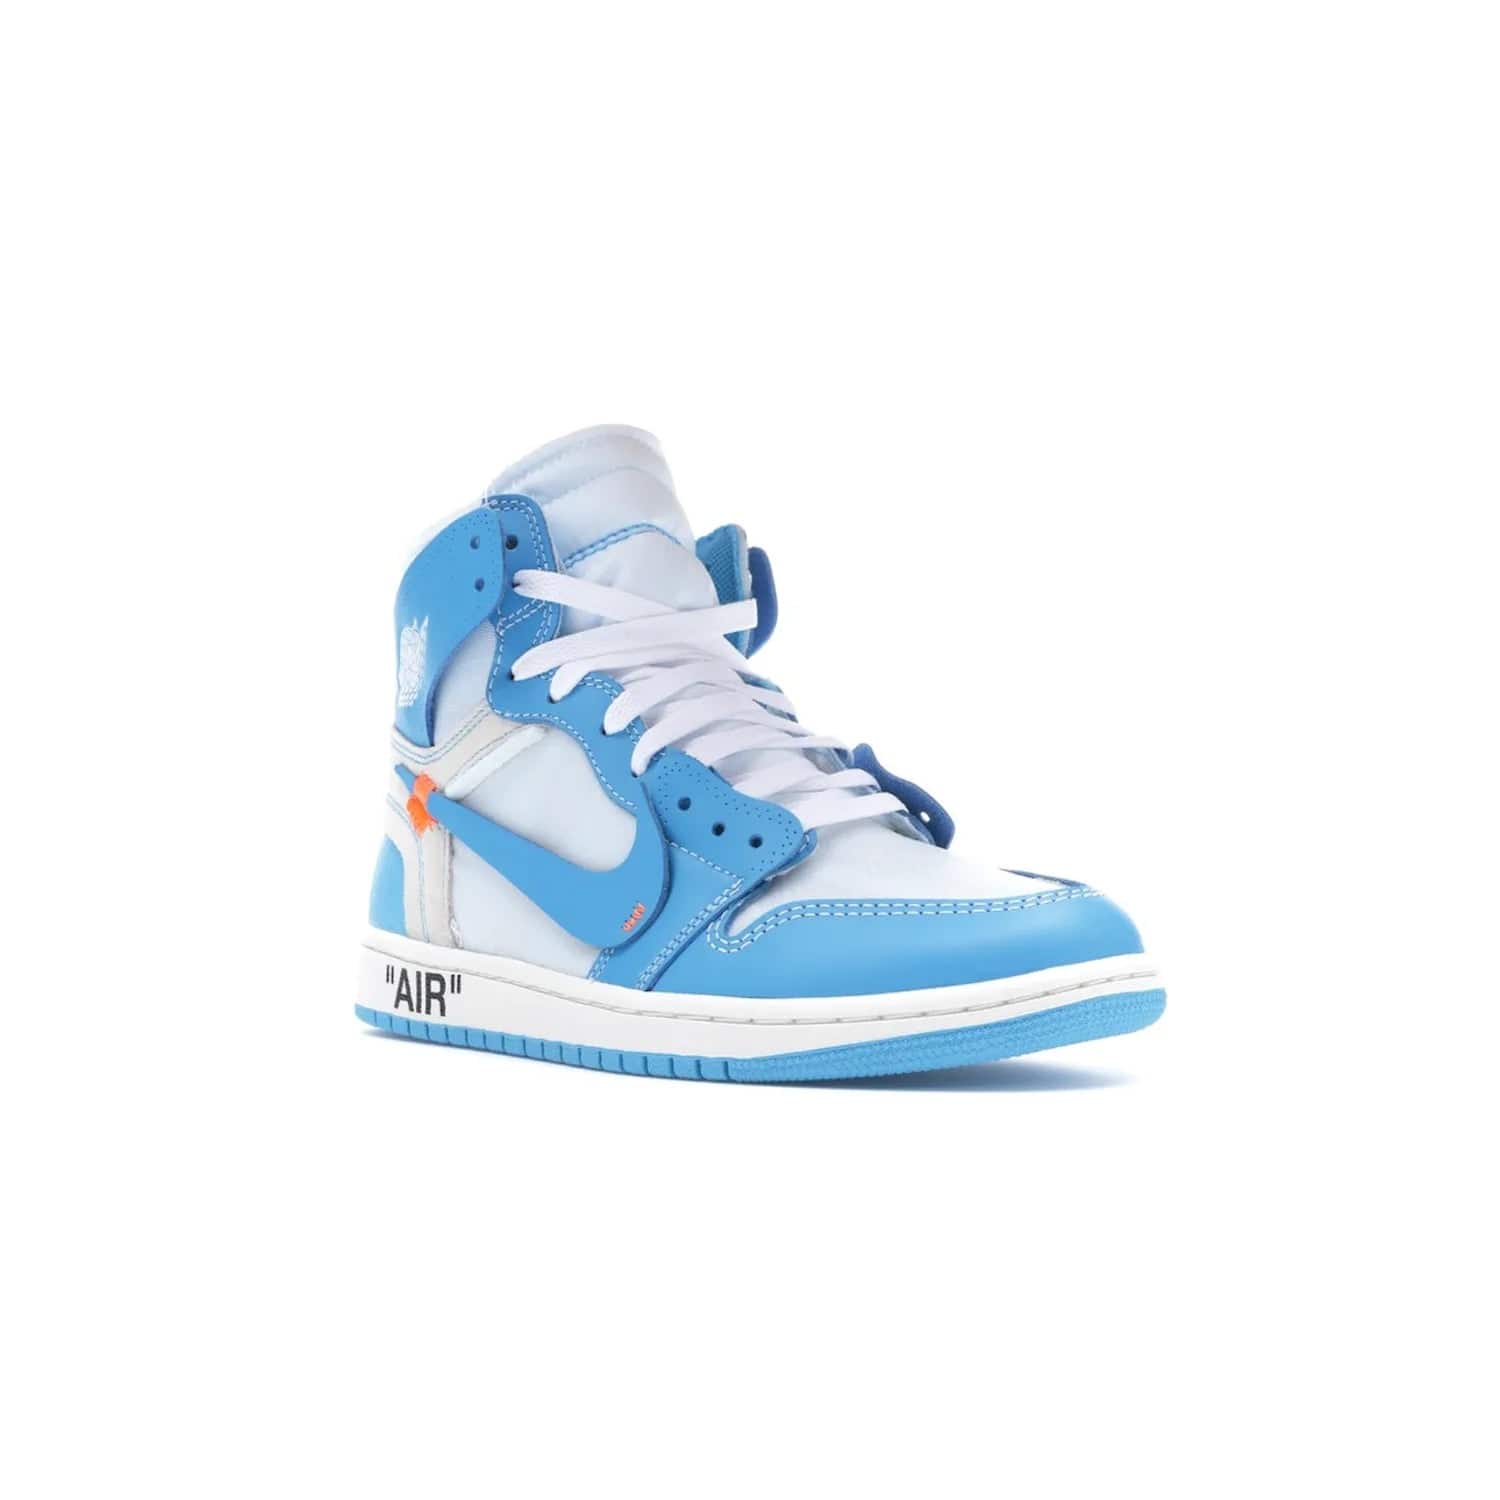 Jordan 1 Retro High Off-White University Blue - Image 6 - Only at www.BallersClubKickz.com - Classic Jordan 1 Retro High "Off-White UNC" sneakers meld style and comfort. Boasting deconstructed white and blue leather, Off-White detailing, and a white, dark powder blue and cone colorway, these sneakers are perfect for dressing up or down. Get the iconic Off-White Jordan 1's and upgrade your look.